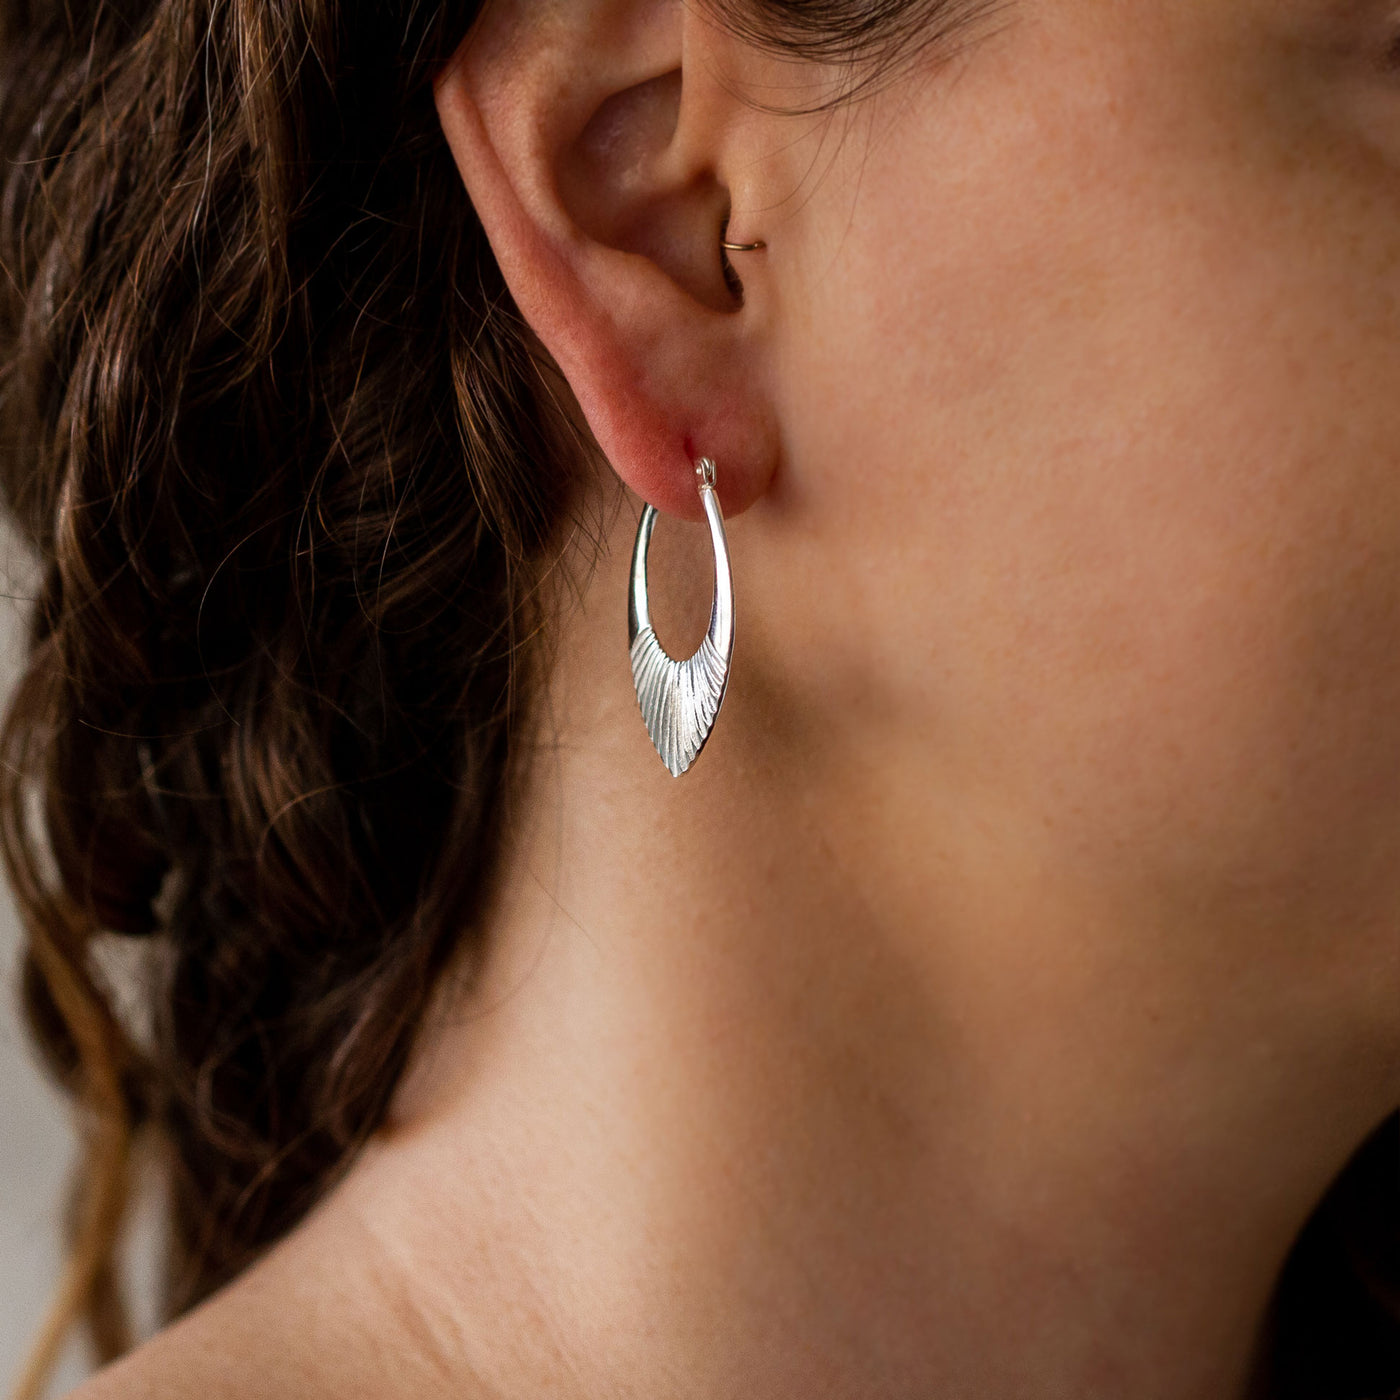 Medium Silver Oblong hoops with hinge closure and sunburst bottom by Corey Egan on an ear